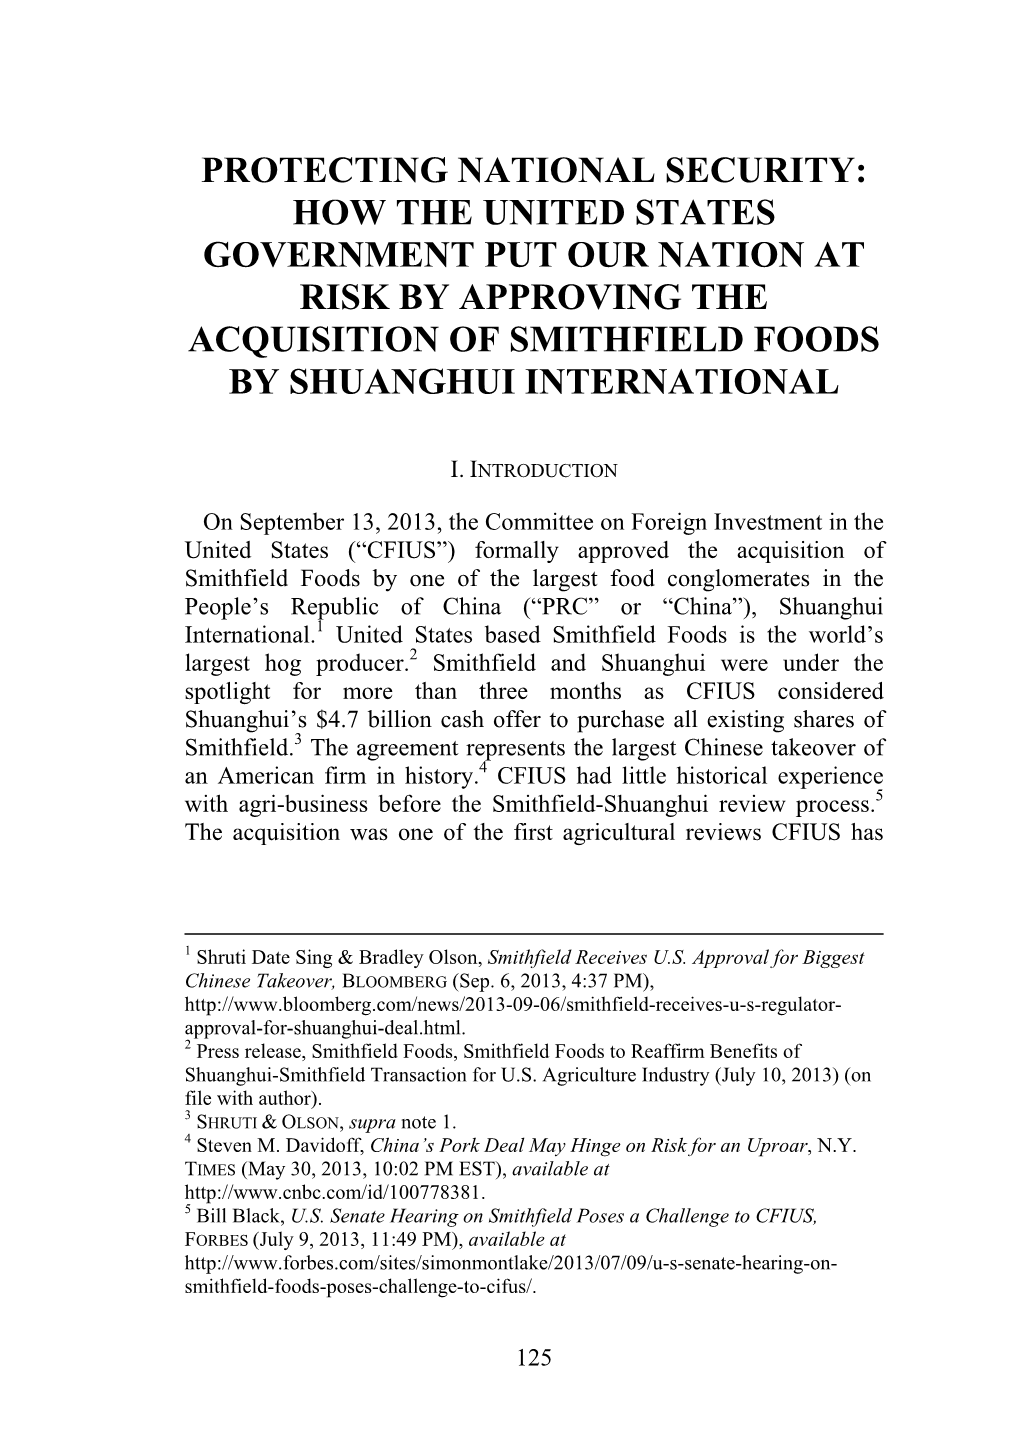 Protecting National Security: How the United States Government Put Our Nation at Risk by Approving the Acquisition of Smithfield Foods by Shuanghui International